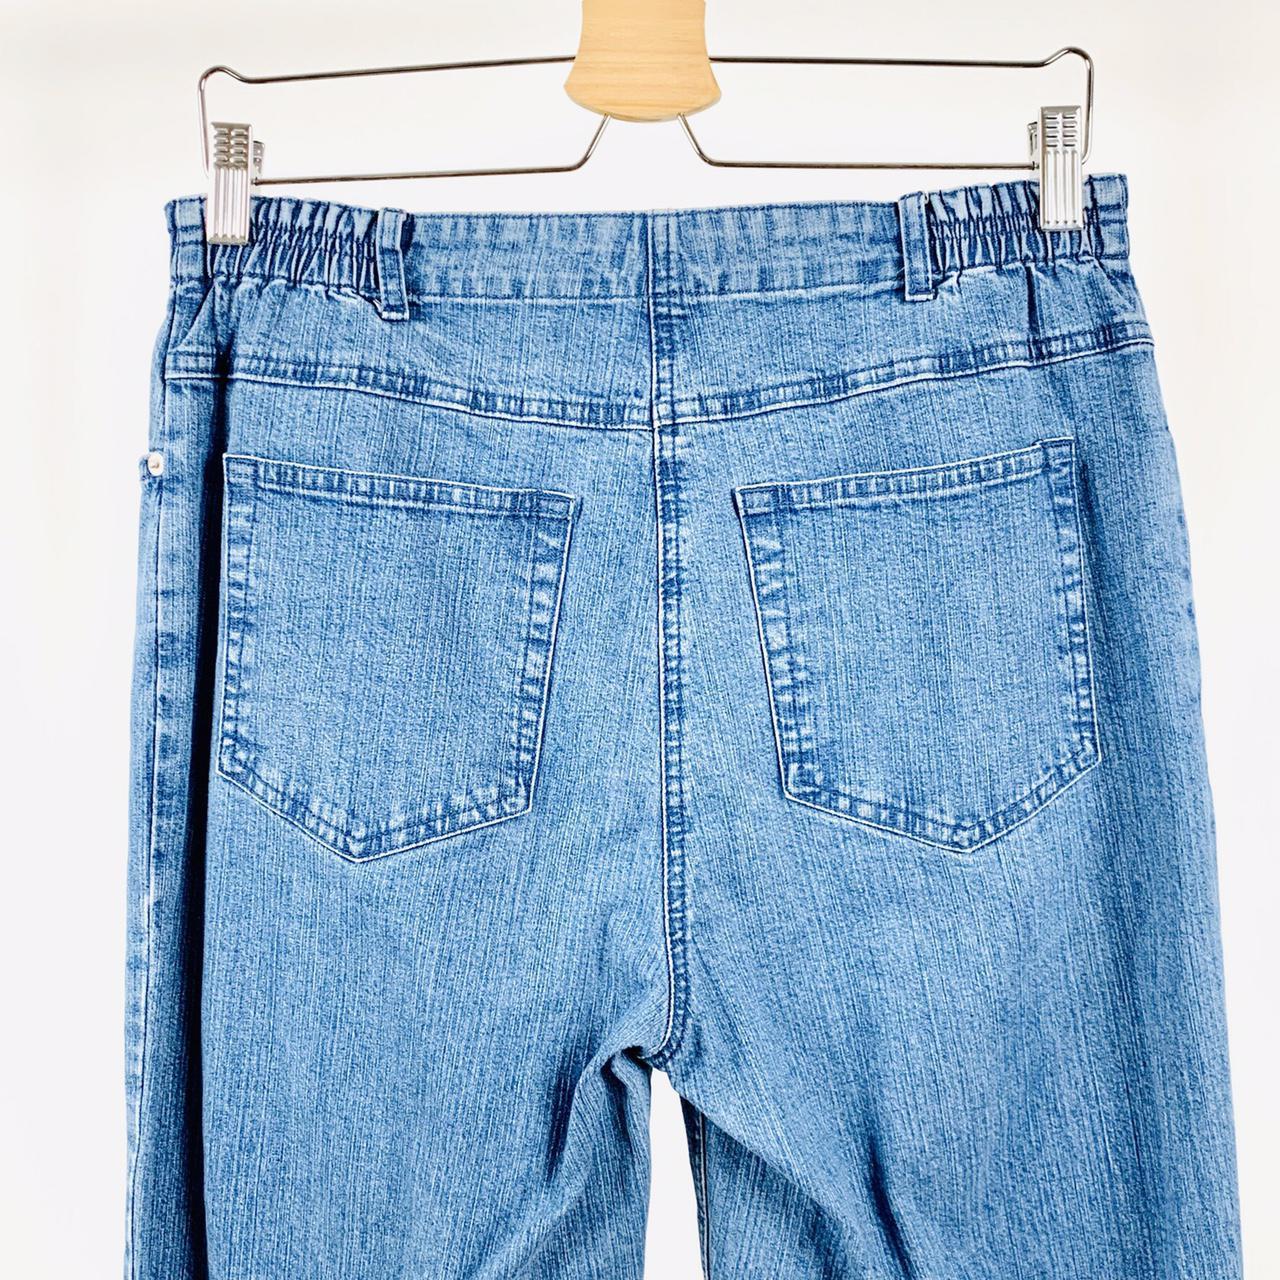 Product Image 4 - Vintage Jeans only get better